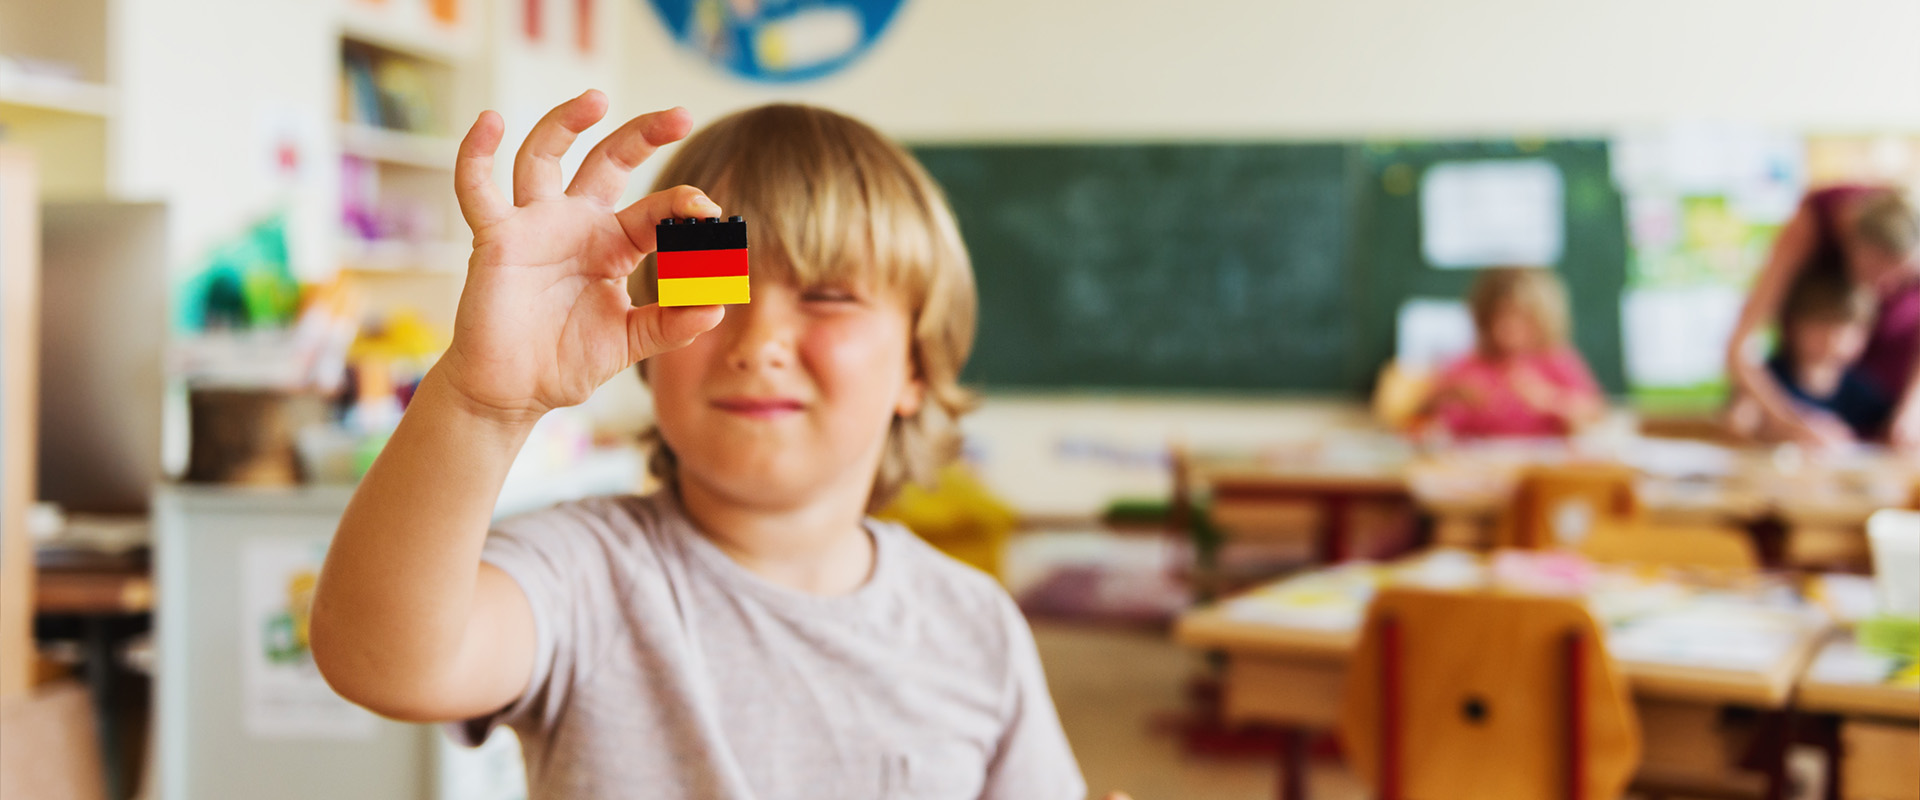 Boy working in classroom, holding self made german flag